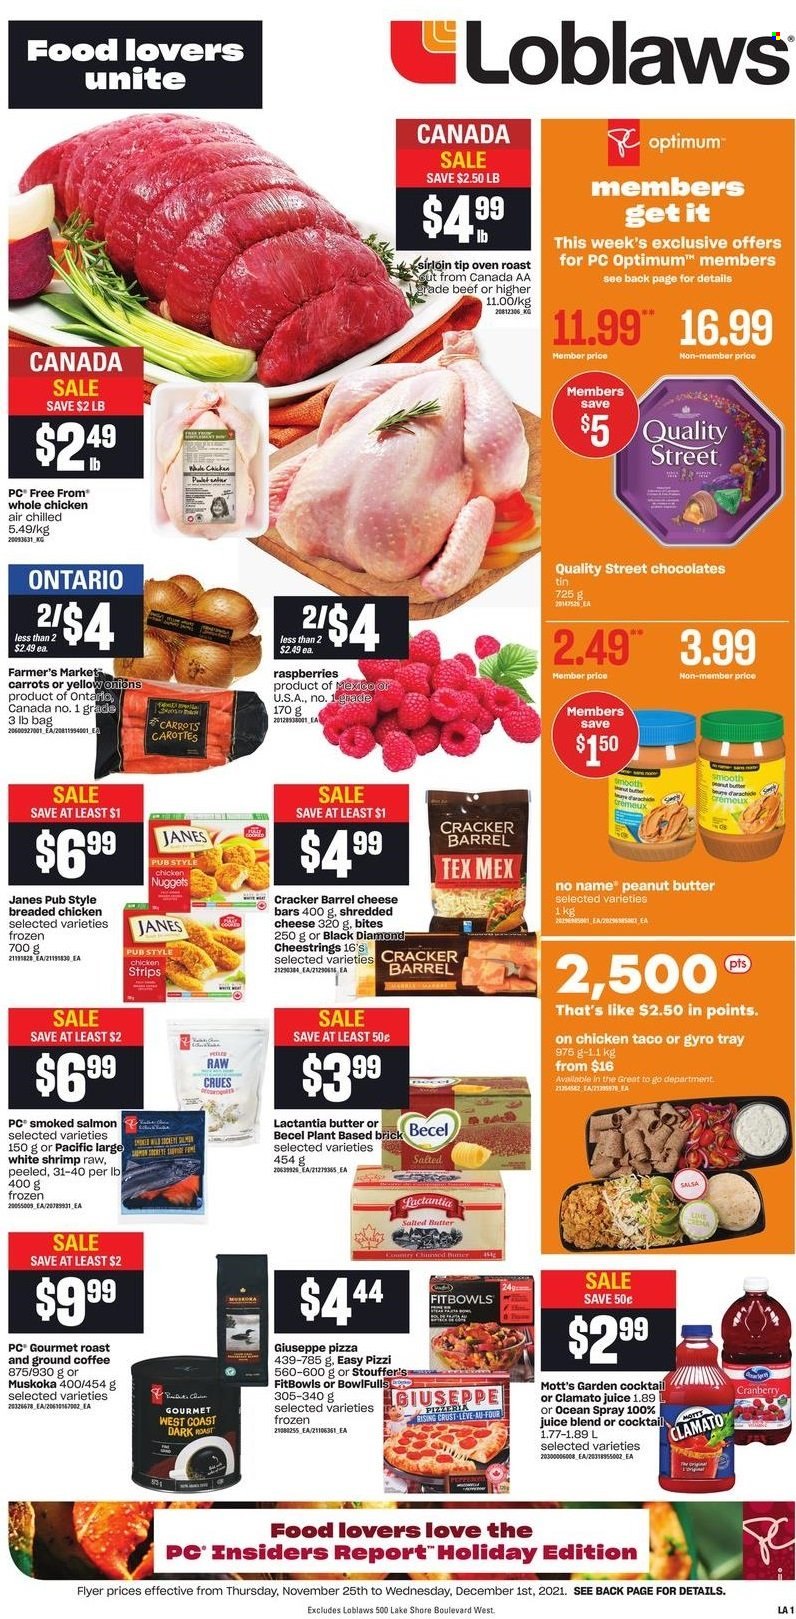 thumbnail - Loblaws Flyer - November 25, 2021 - December 01, 2021 - Sales products - carrots, Mott's, salmon, smoked salmon, shrimps, No Name, pizza, nuggets, fried chicken, chicken nuggets, shredded cheese, string cheese, salted butter, strips, Stouffer's, chocolate, crackers, peanut butter, juice, Clamato, coffee, ground coffee, whole chicken, chicken, Optimum. Page 1.